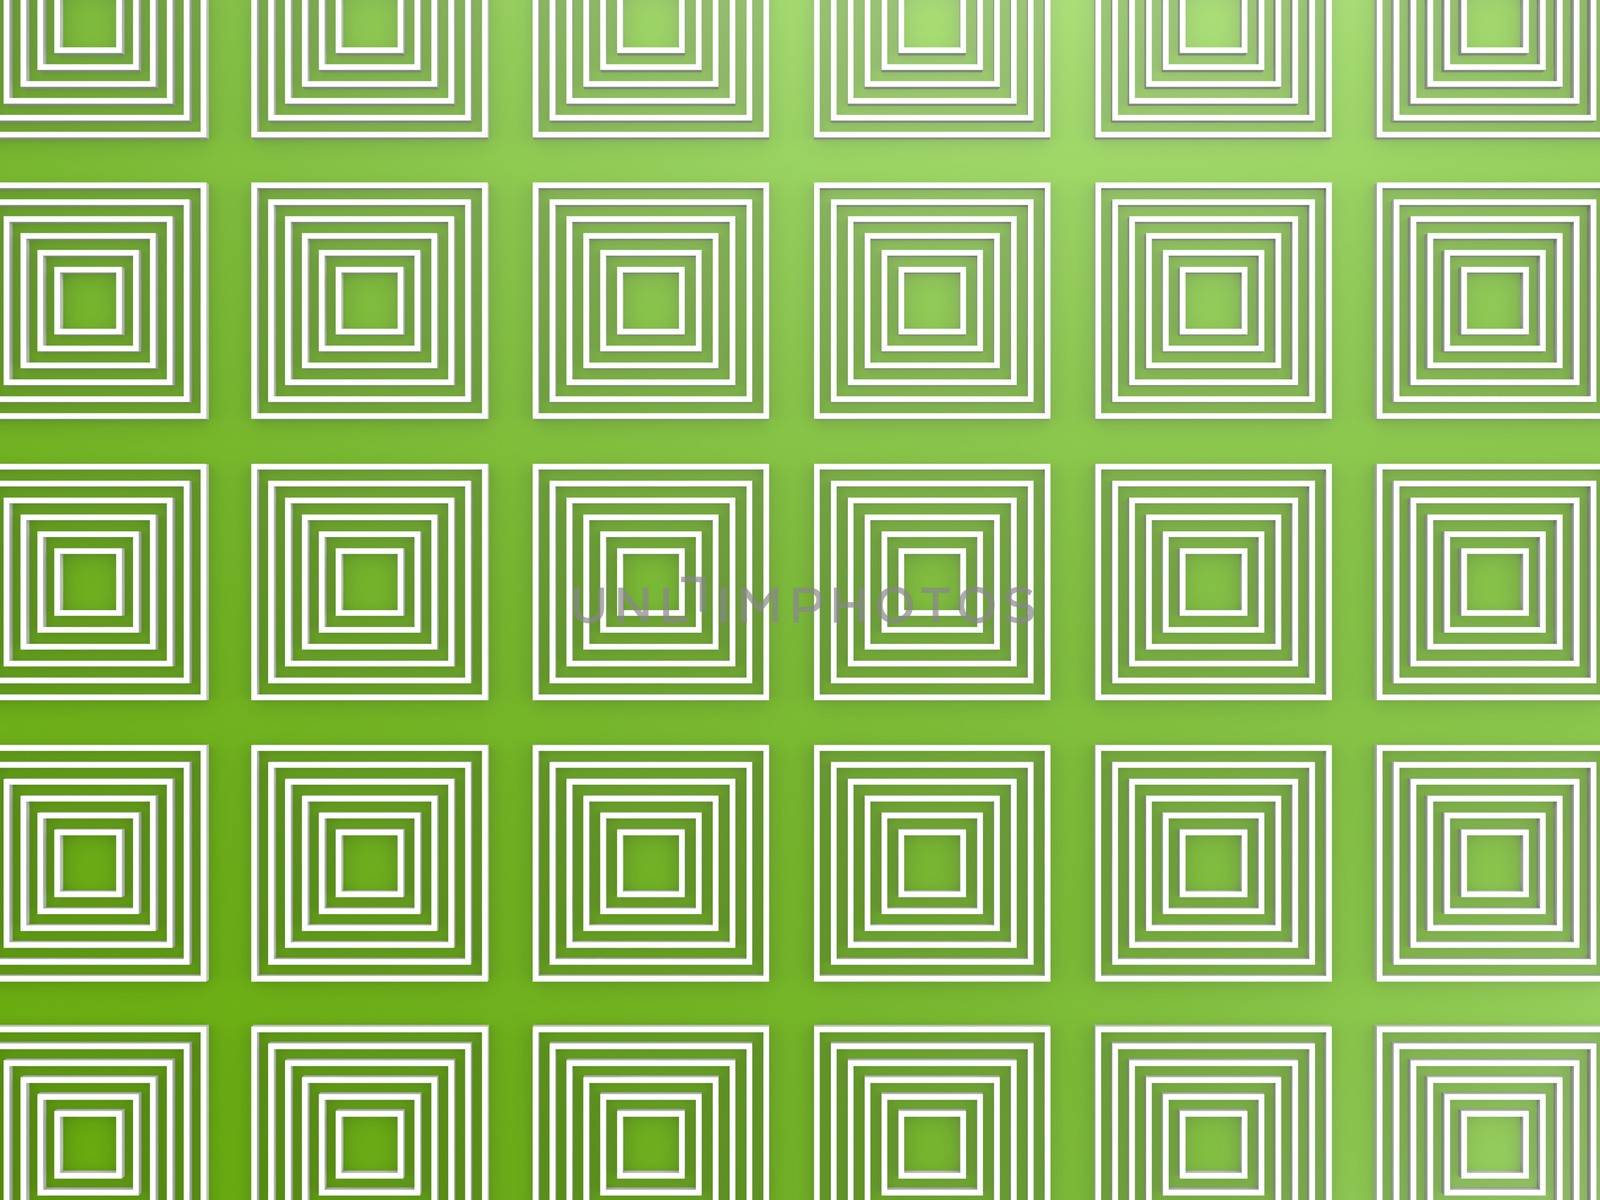 Green square pattern